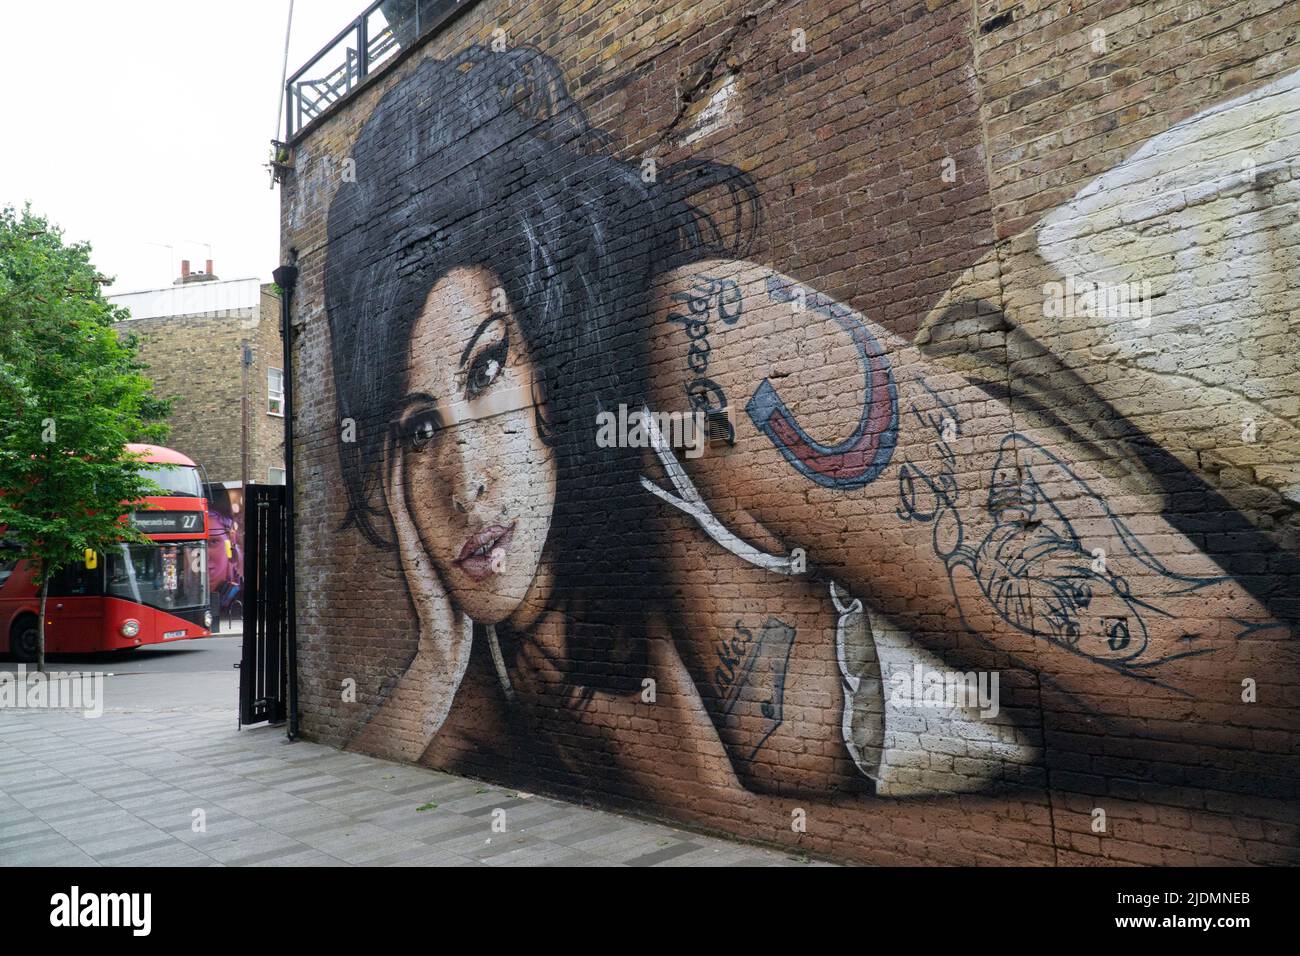 London, UK: Street artist JXC has painted a mural of Amy Winehouse on a brick wall at the side of the Hawley Arms pub in Camden. Anna Watson/Alamy Stock Photo